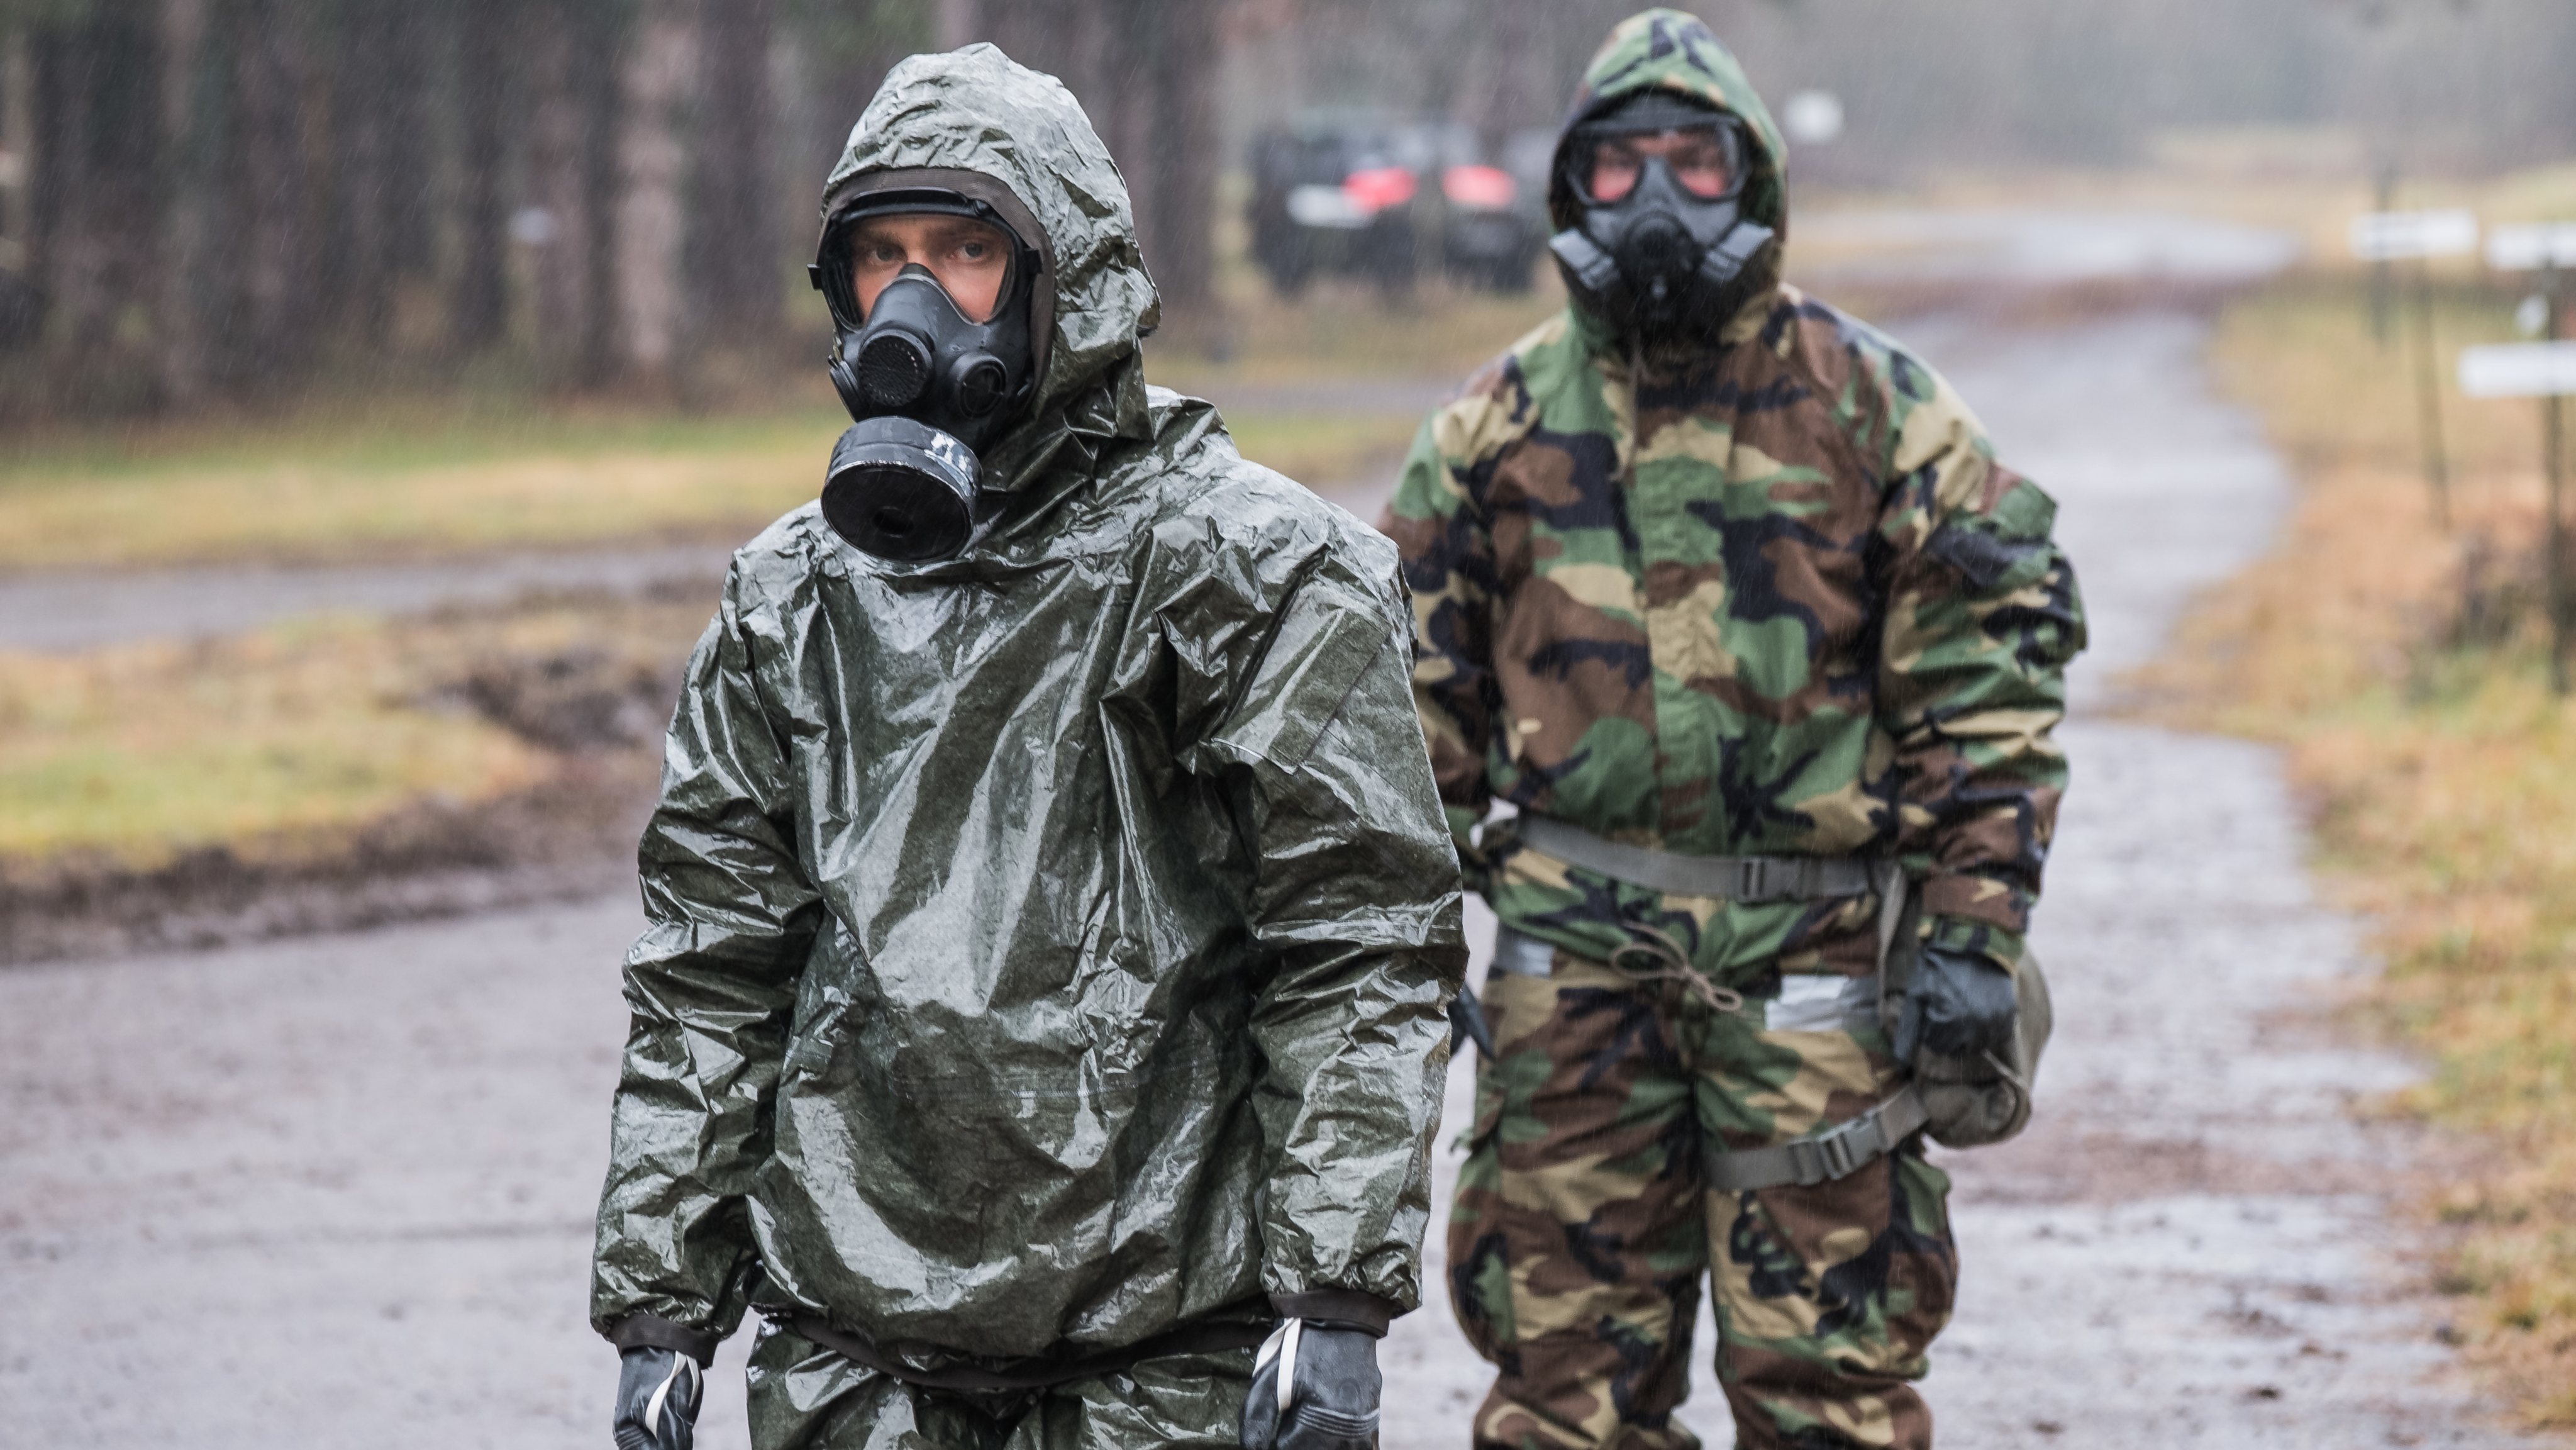 simulation of a Nuclear Biological and Chemical Warfare (Nbc) during the training of French paratroopers in south of France before going to war in Africa, for Barkhane military operation against terrorism, Occitanie, Toulouse, France